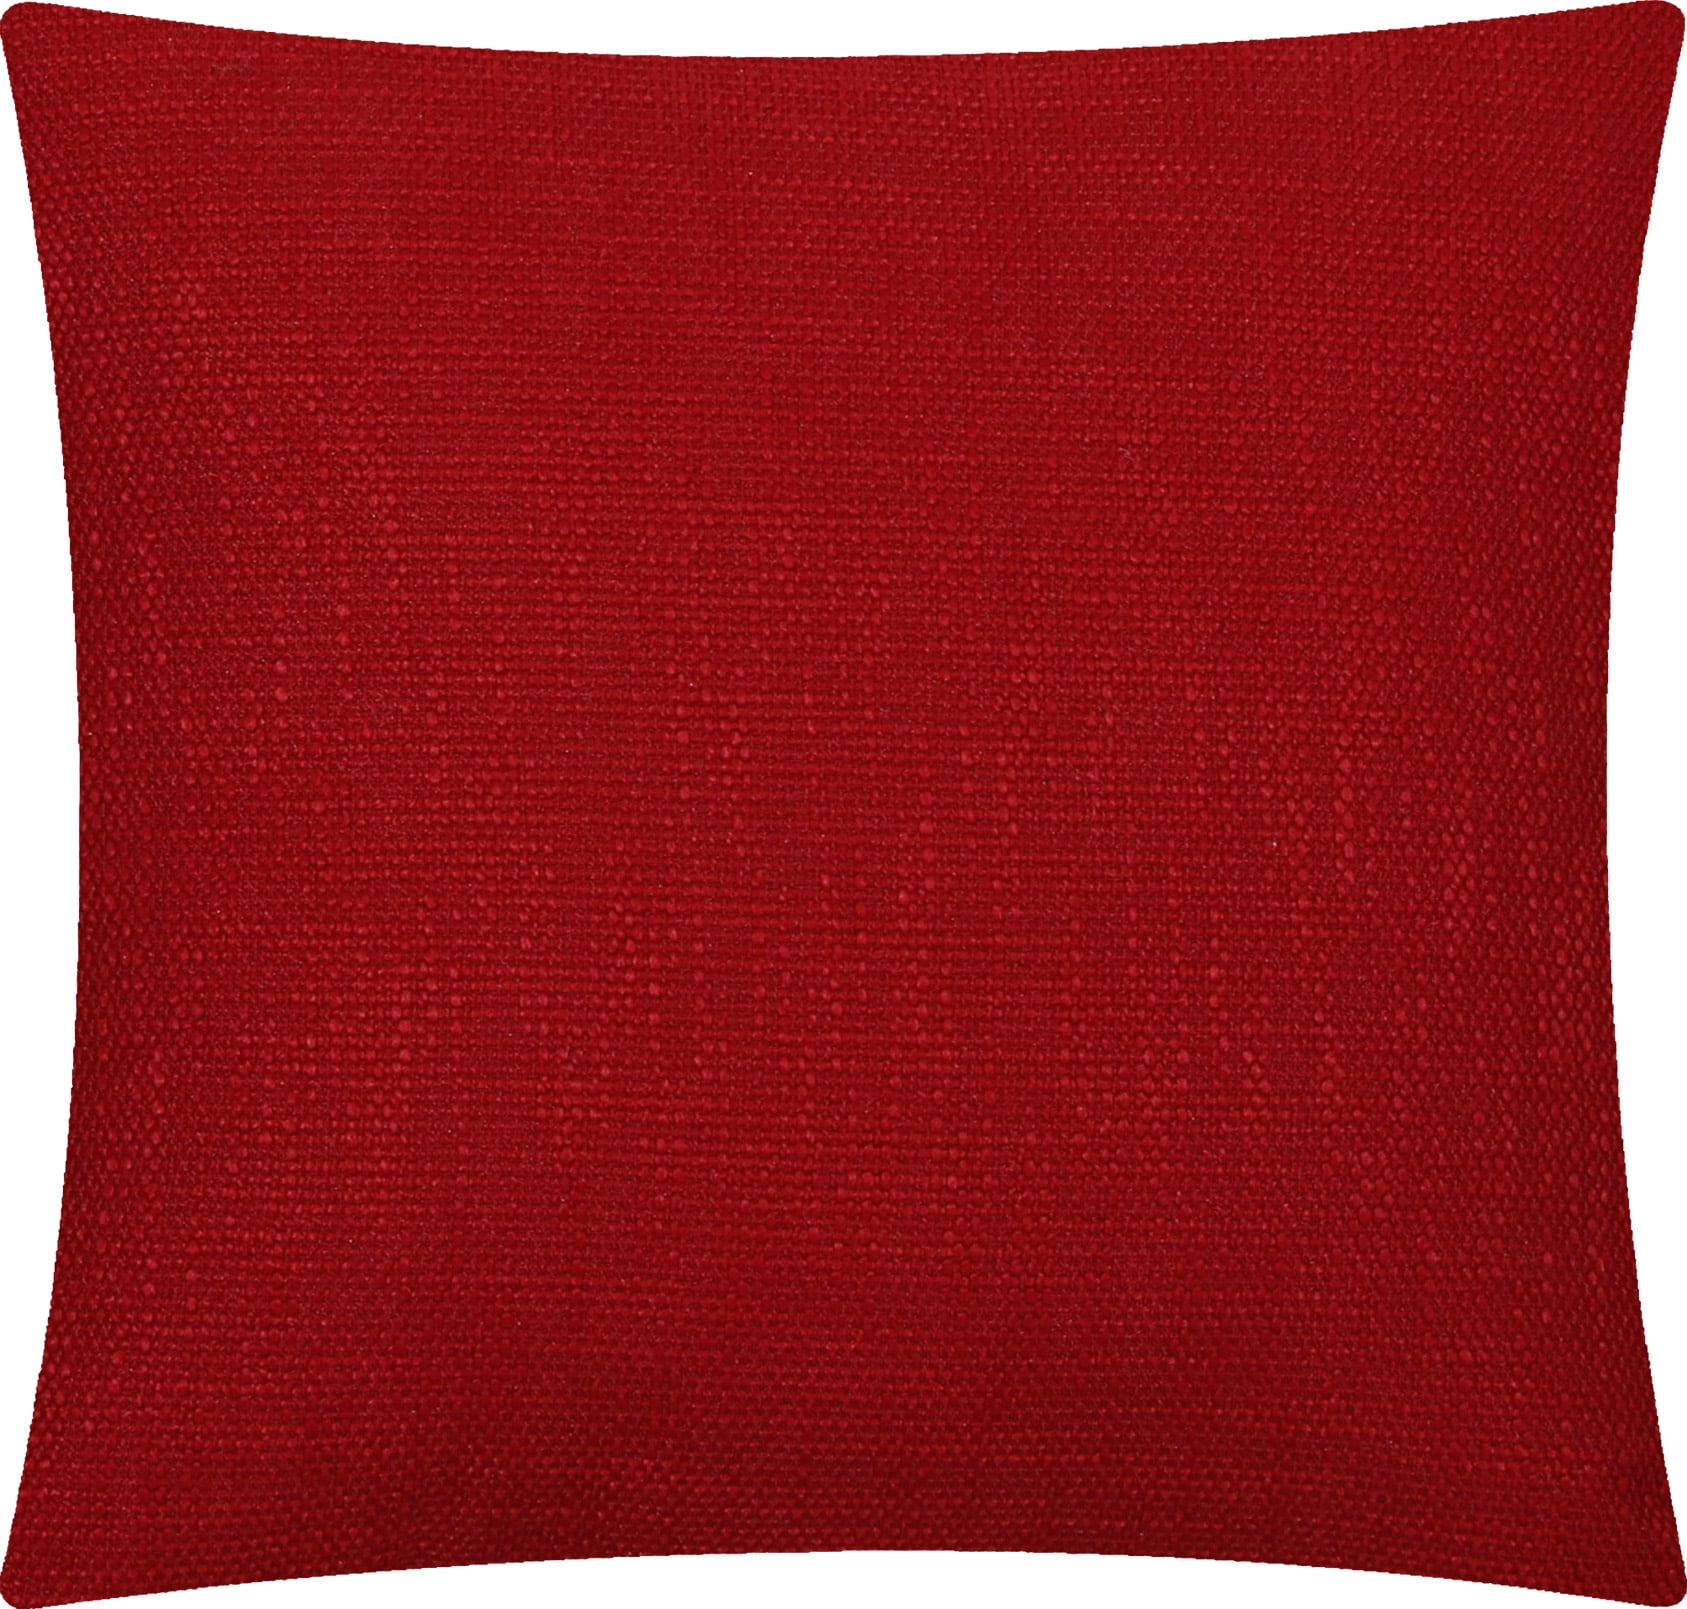 Mainstays Solid Texture Polyester Square Decorative Throw Pillow, 18" x 18", Red